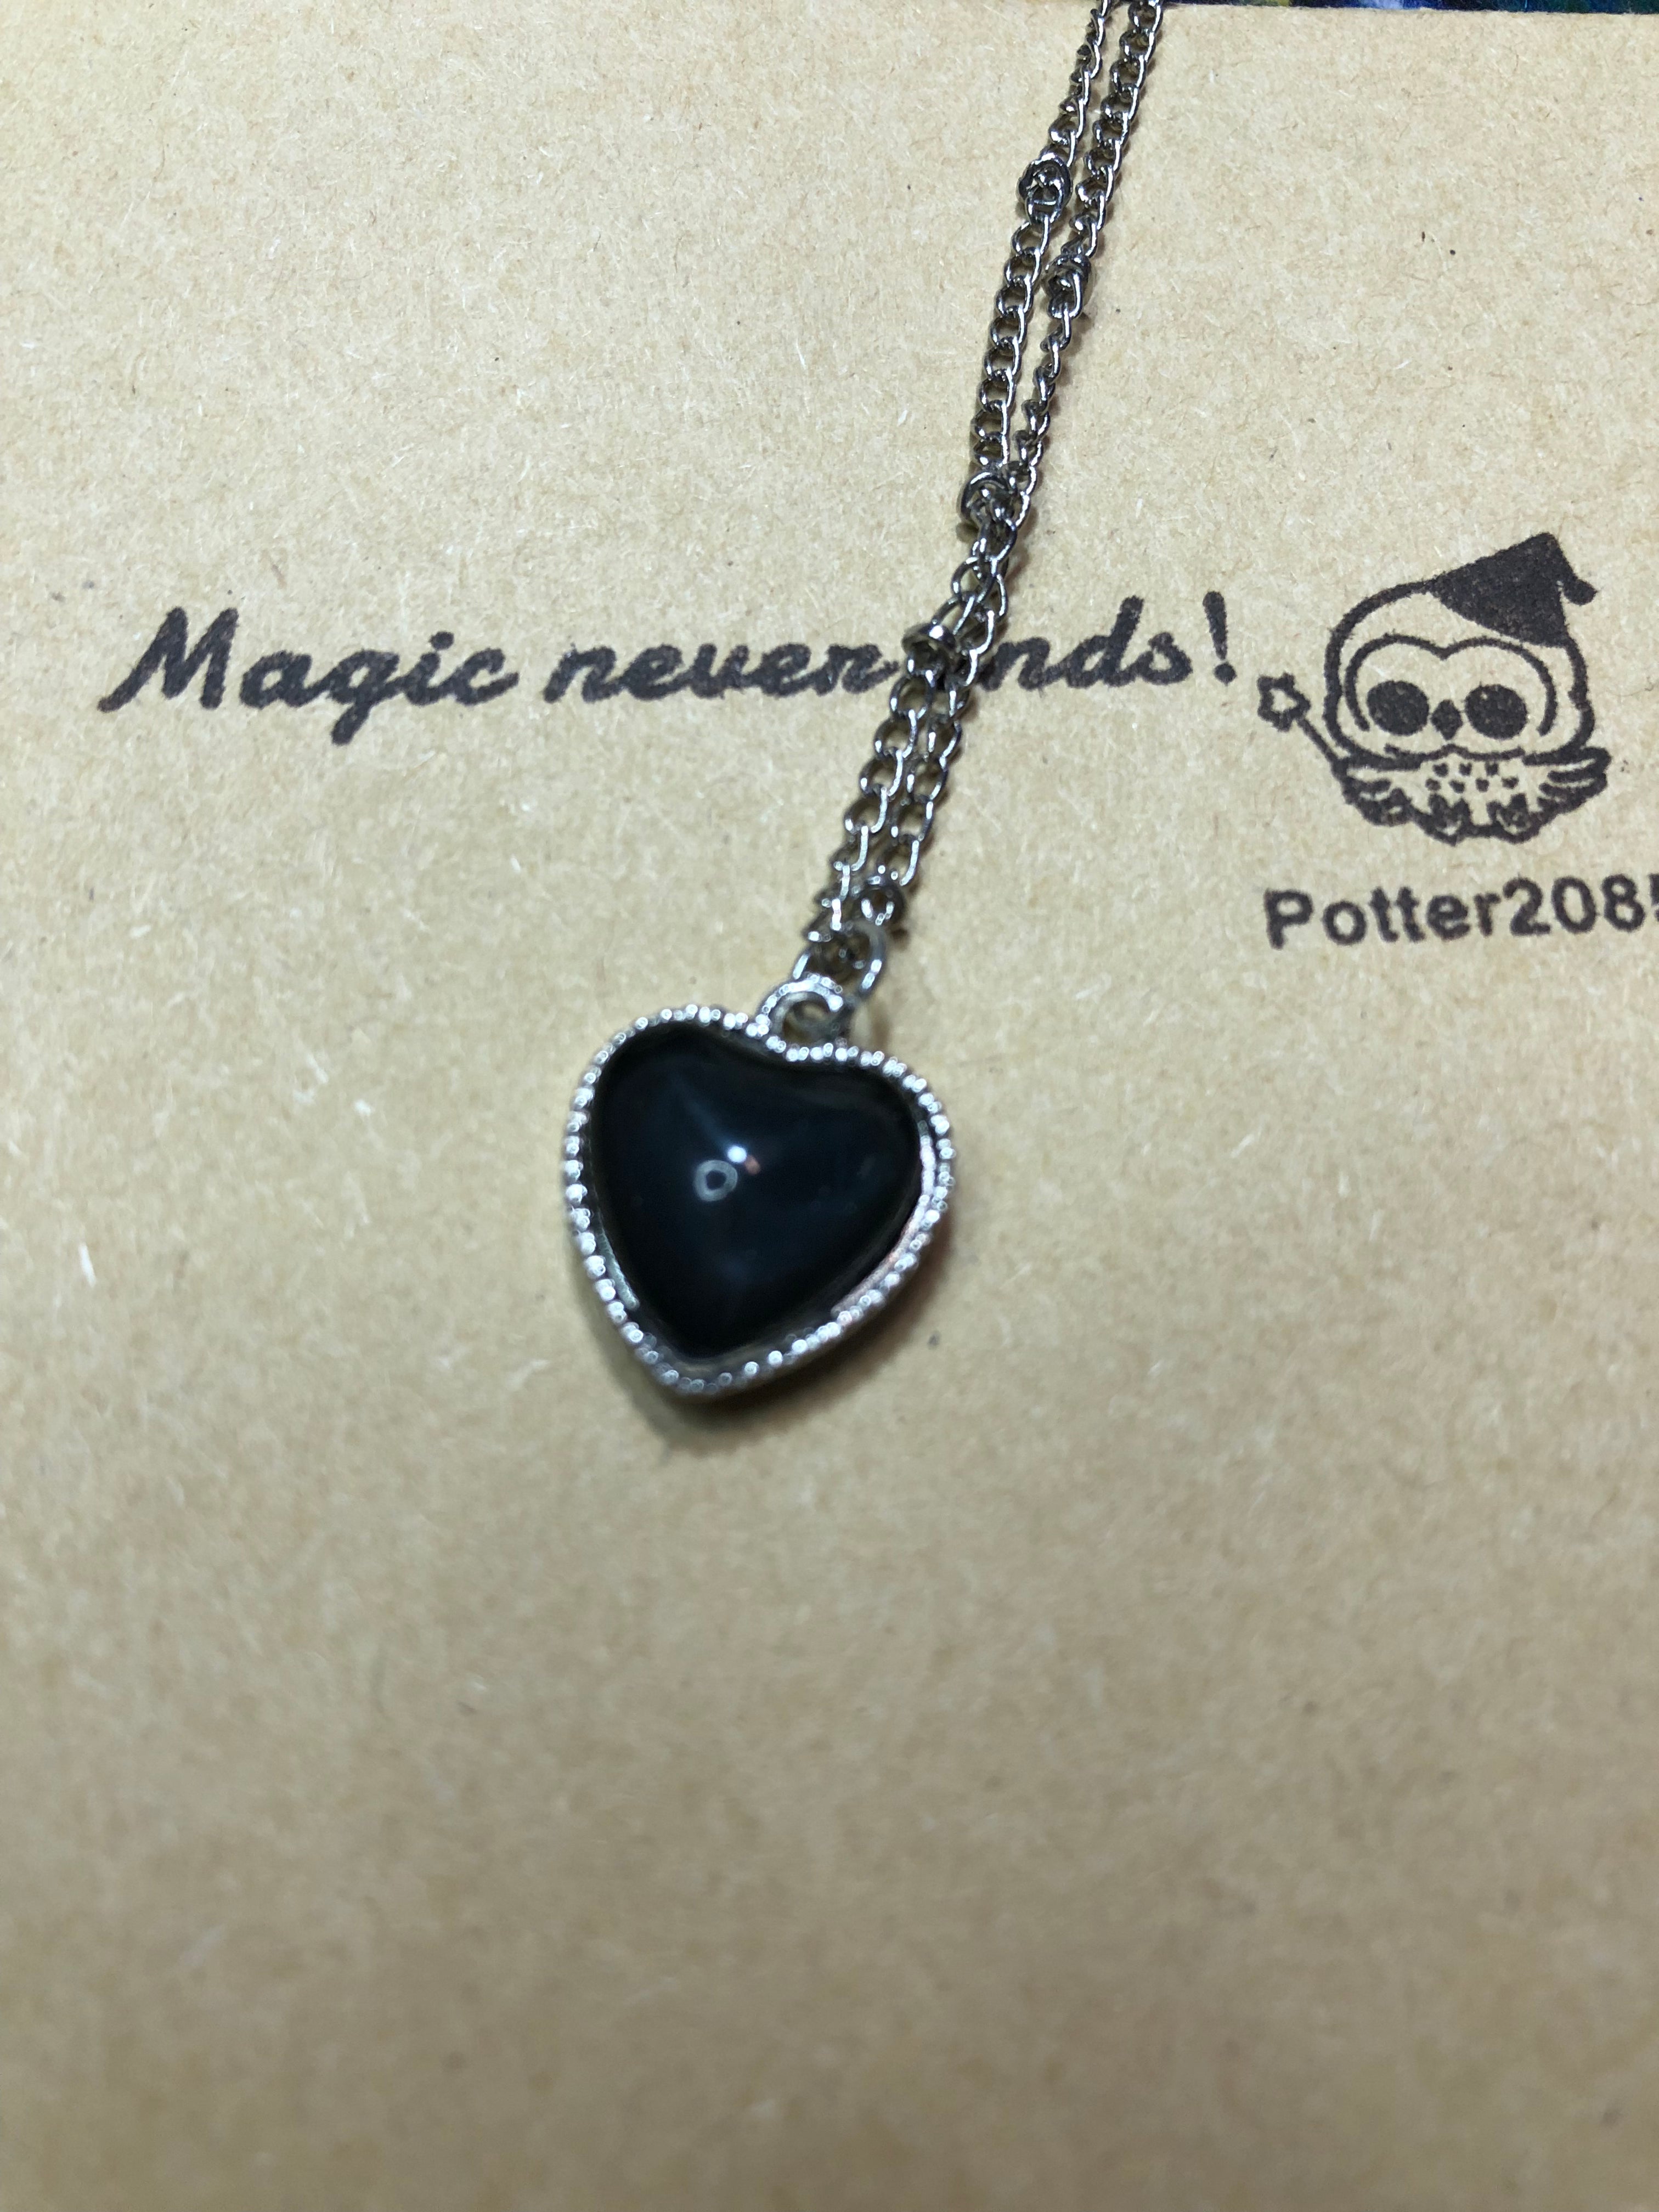 Magic bracelet/necklace（can change color according to your mood）